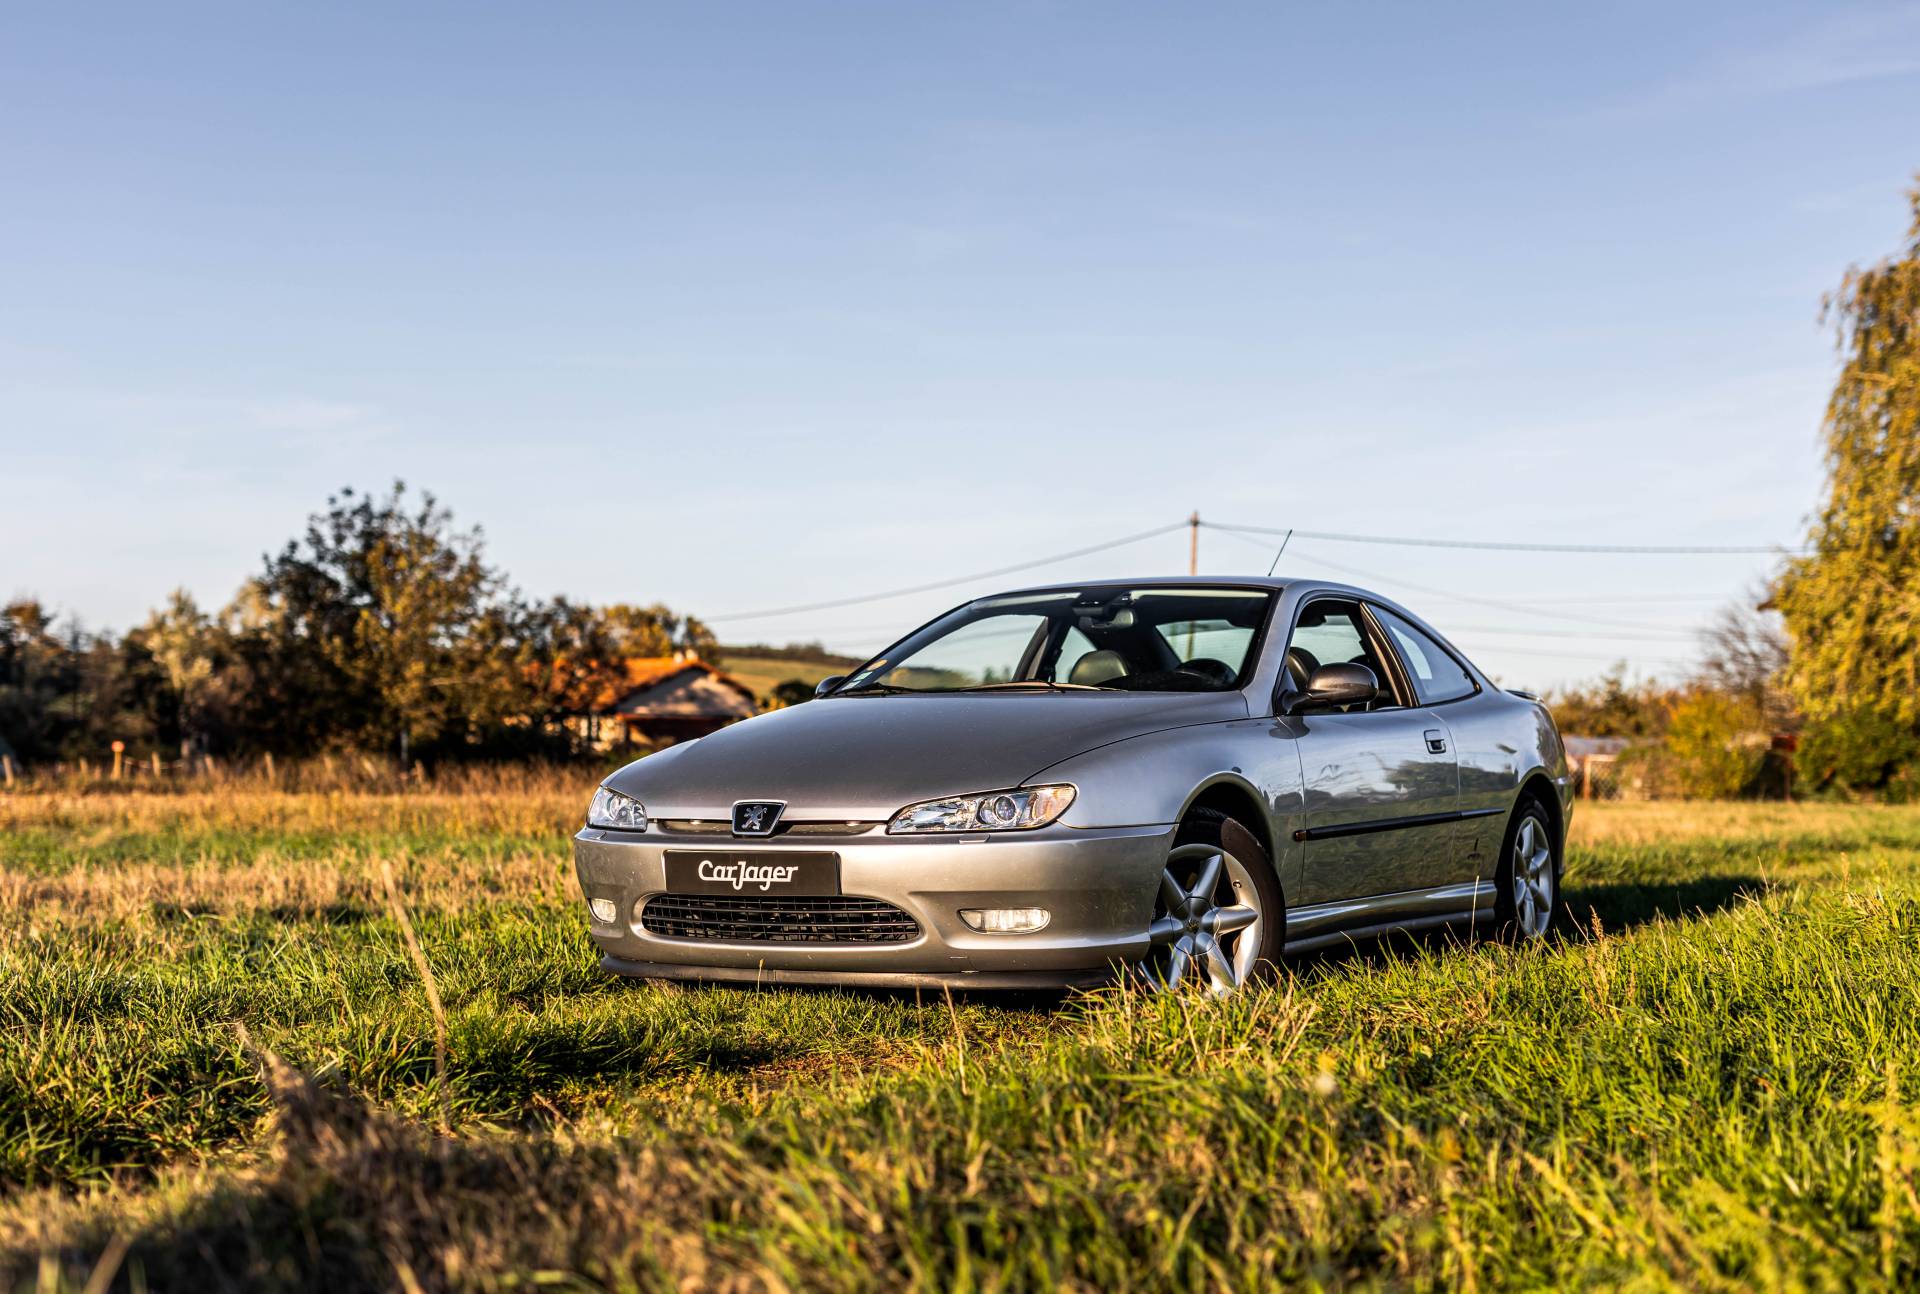 Classic 1999 Peugeot 406 V6 Pininfarina Coupe For Sale. Price 7 500 EUR -  Dyler